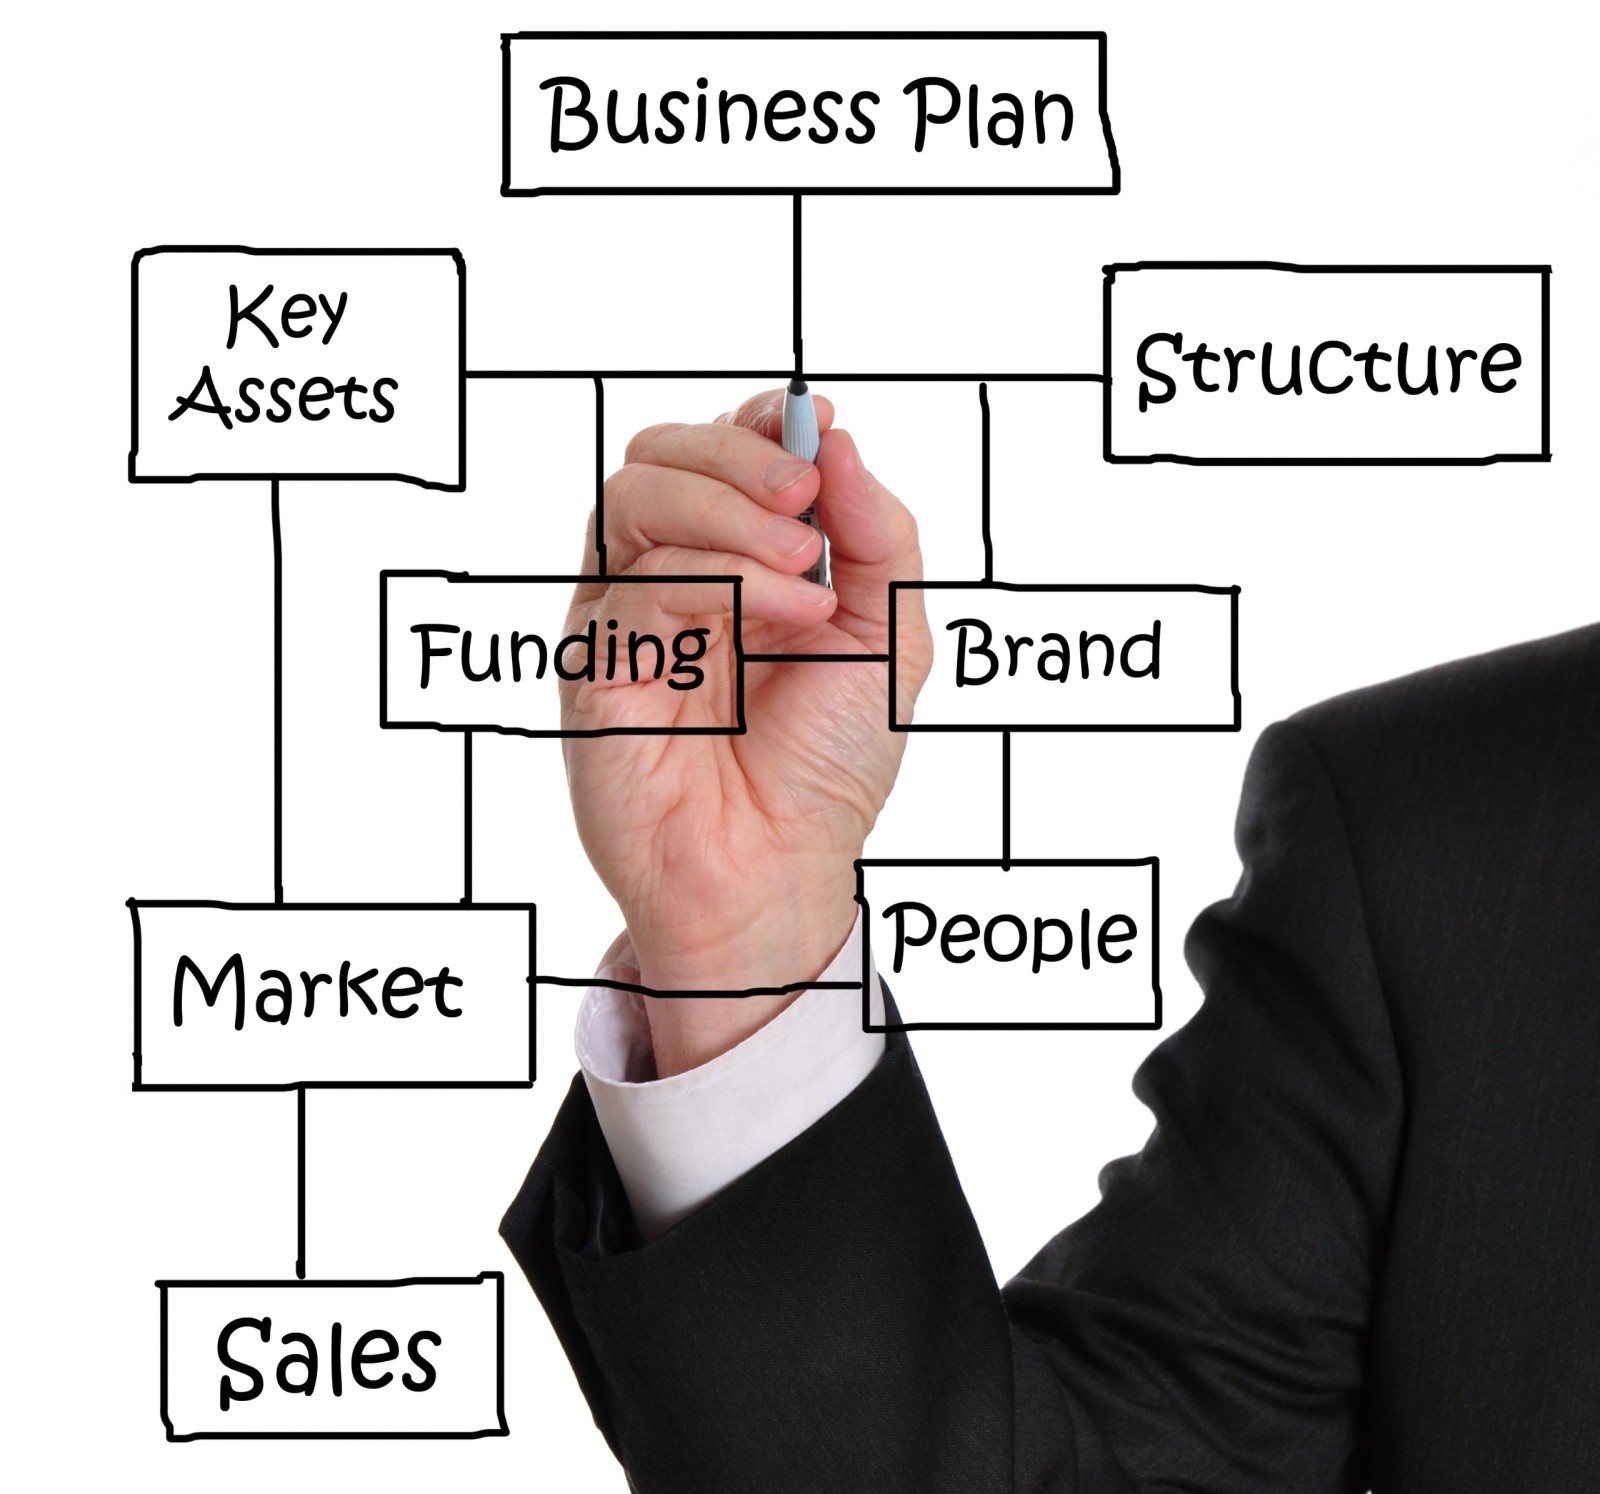 Your Travel Agency Business Plan